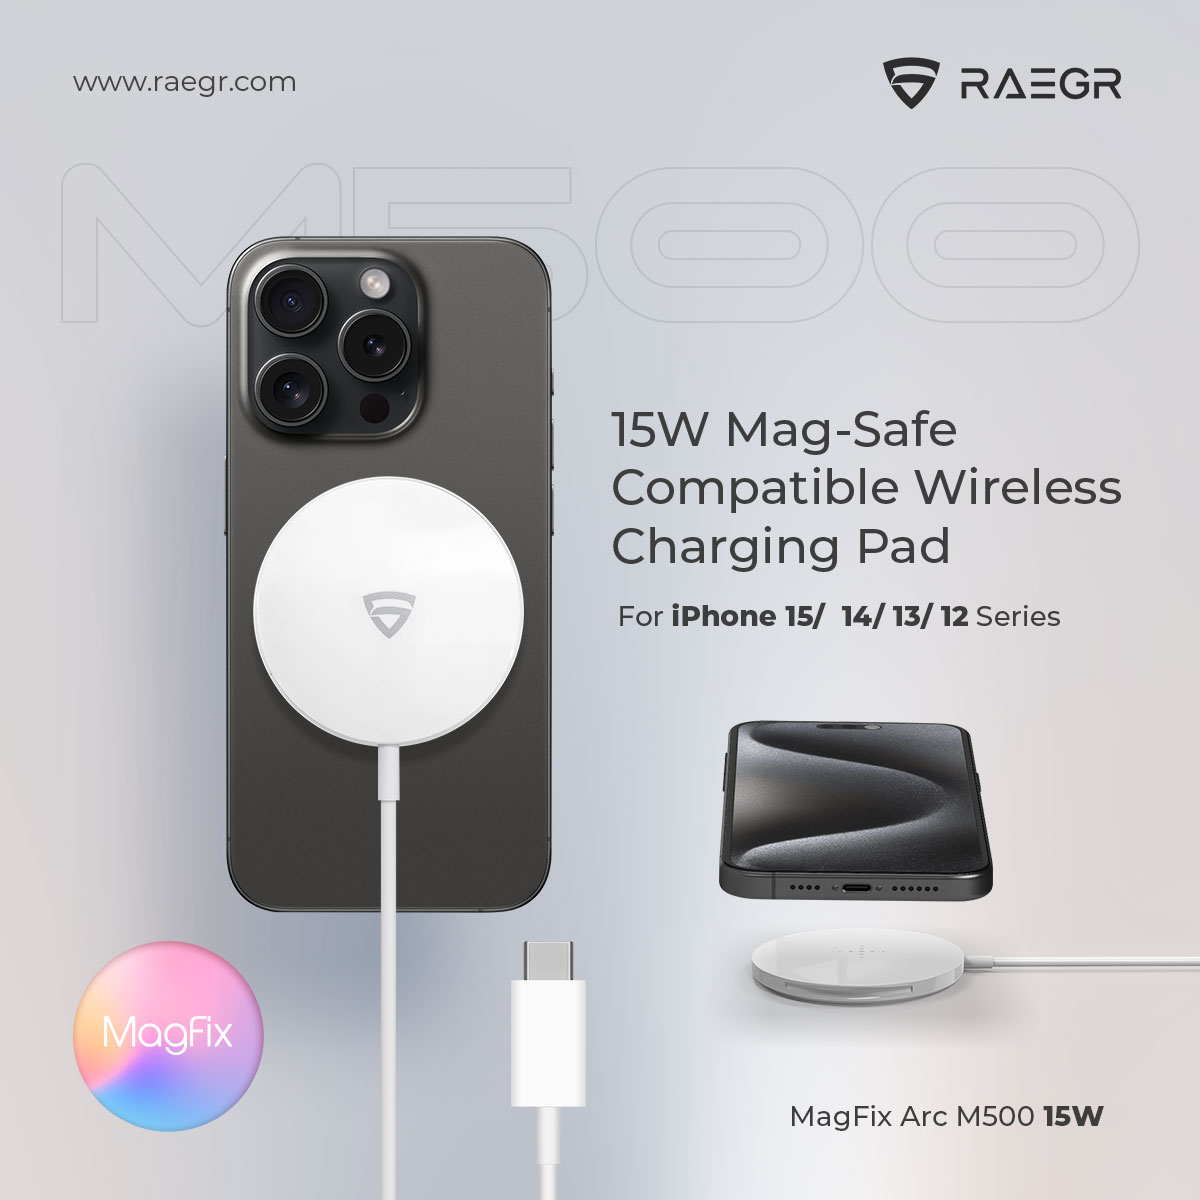 RAEGR Unveils MagFix Arc M500: Affordable 15W MagSafe Compatible Charger for iPhones